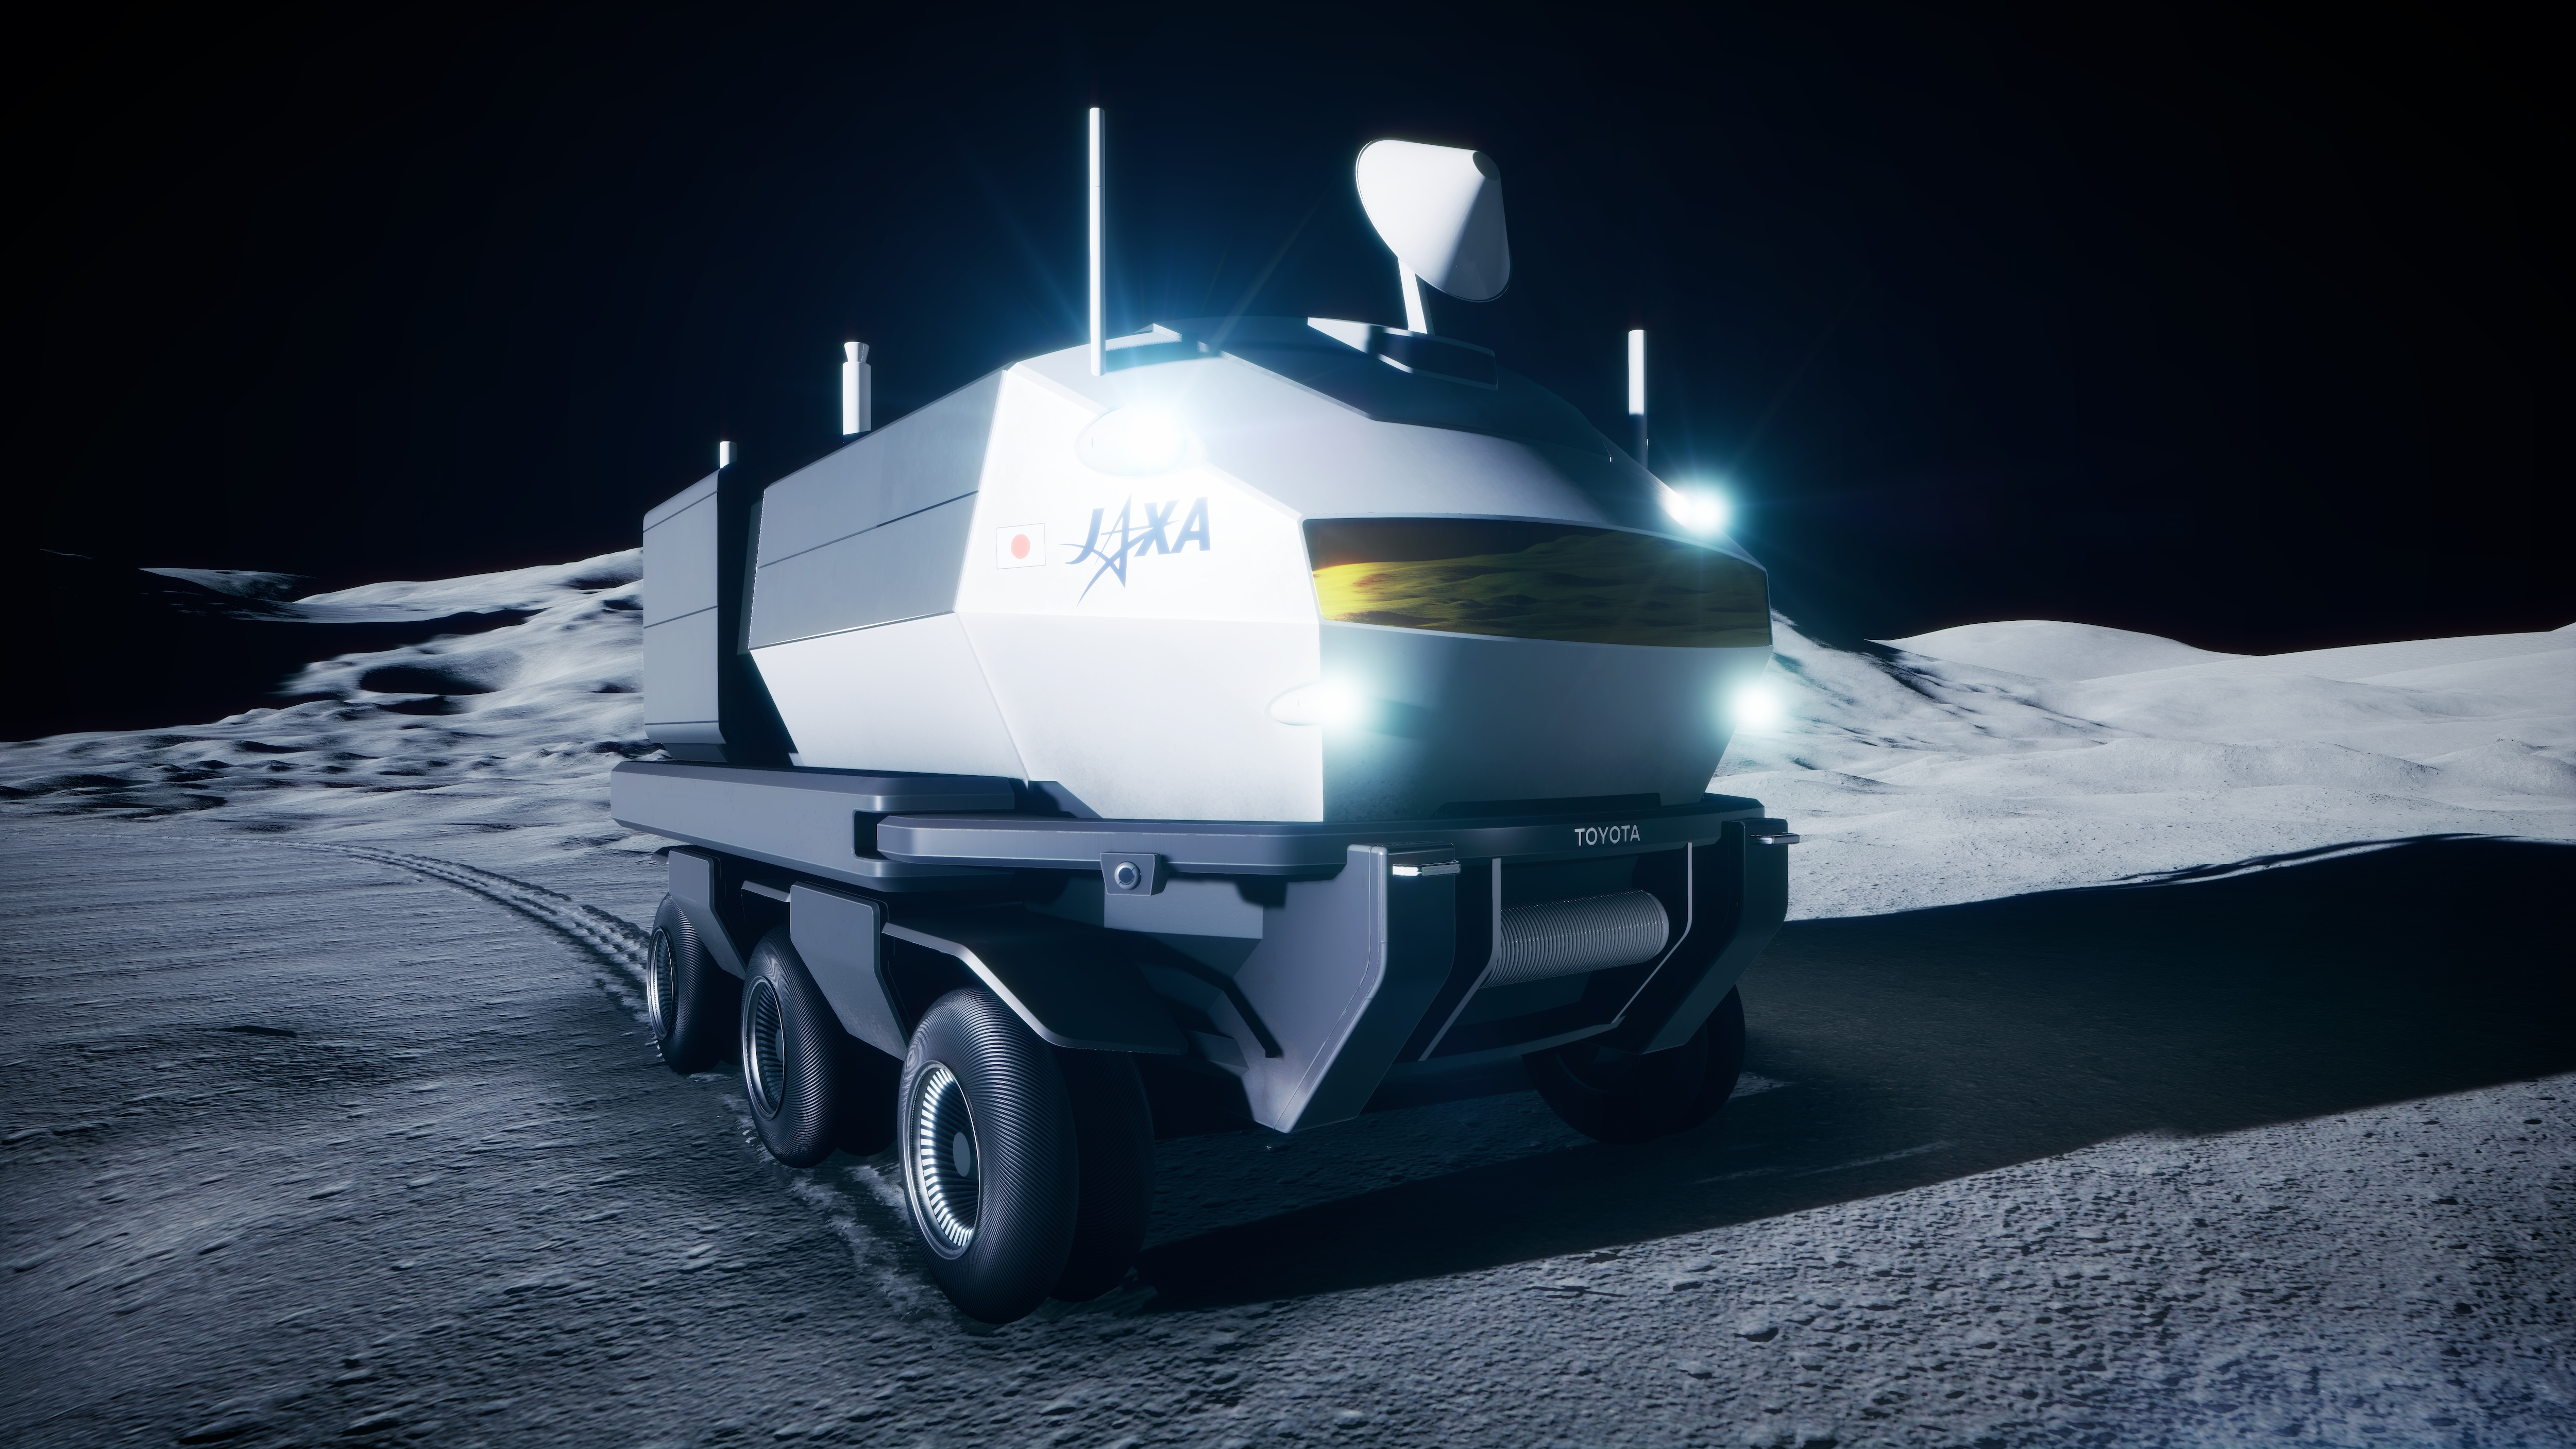 Announced last year, the Lunar Cruiser draws inspiration from Toyota's Land Cruiser and features a hydrogen powertrain derived from the Mirai fuel-cell vehicle and comes with a claimed range of almost 10,000 km,